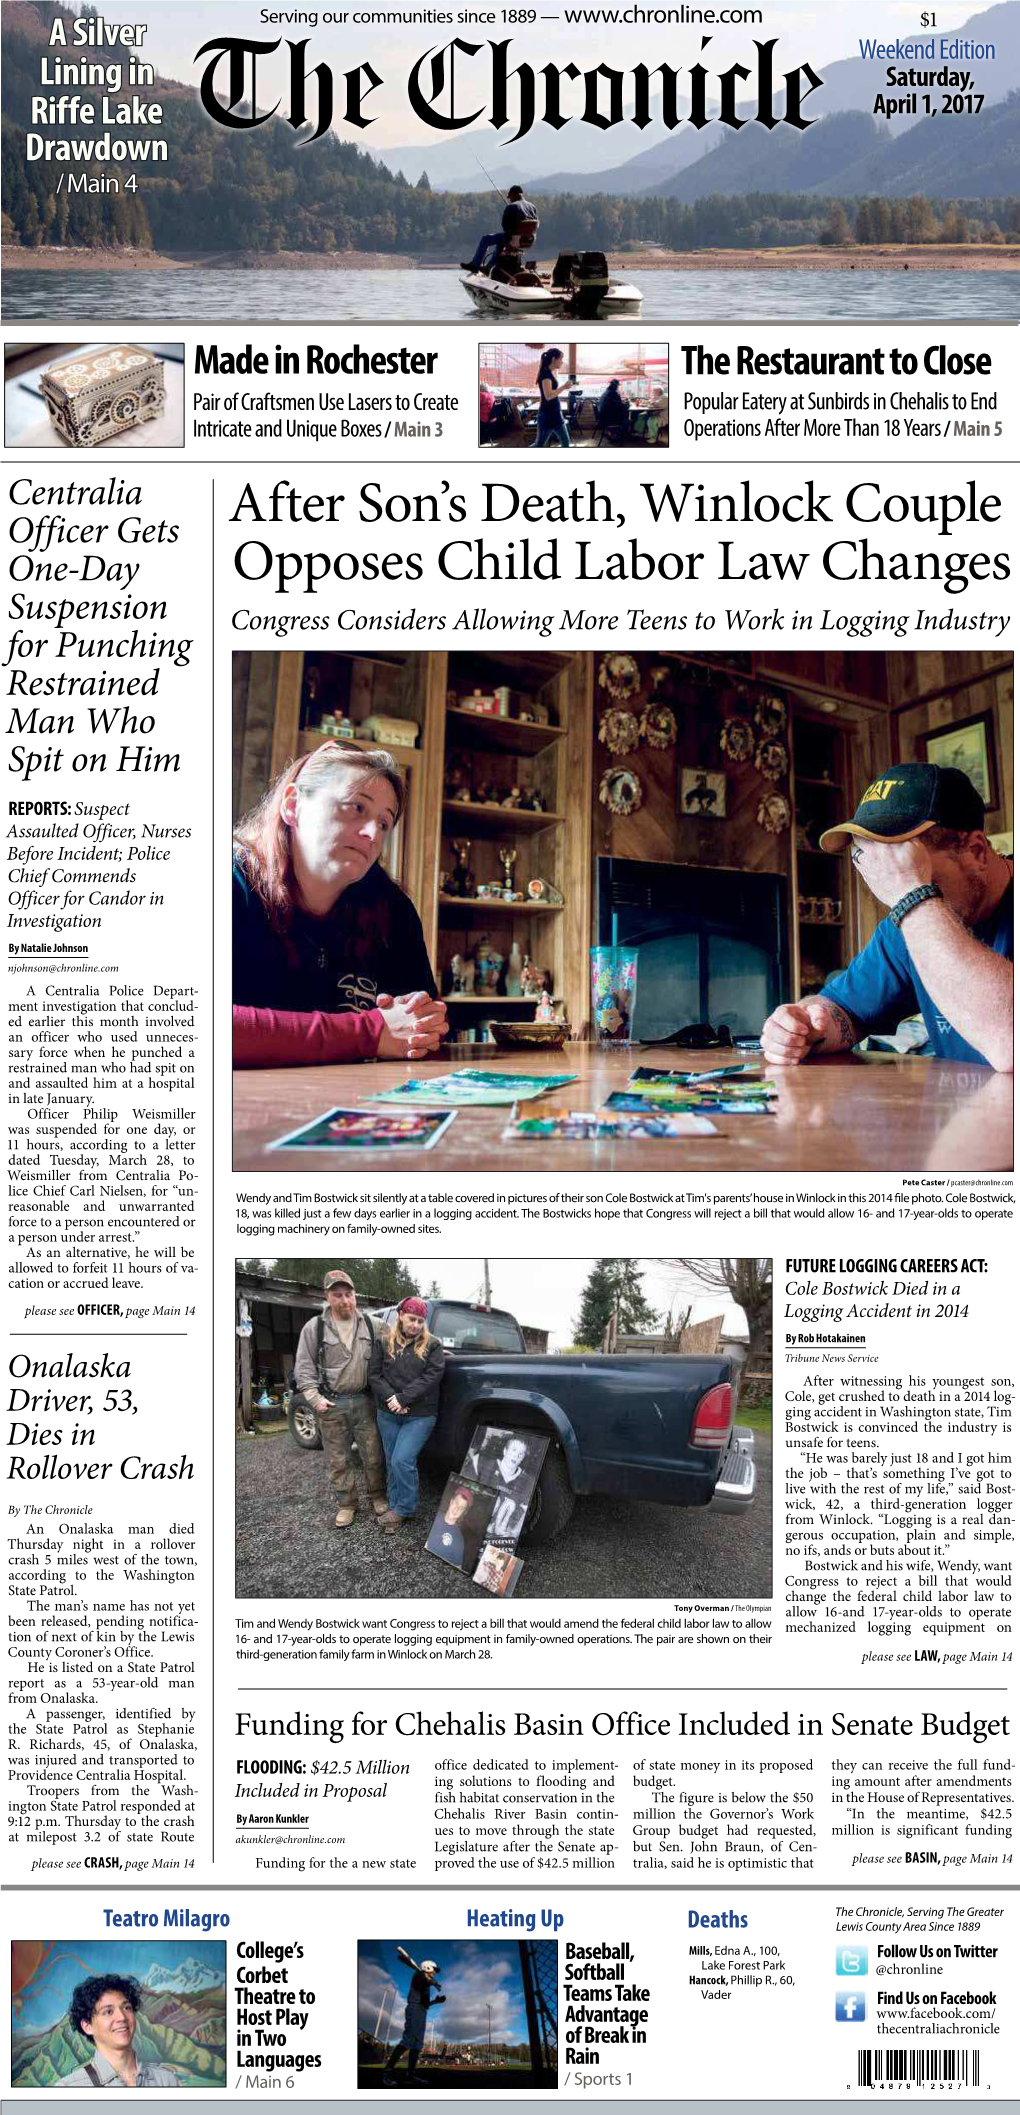 After Son's Death, Winlock Couple Opposes Child Labor Law Changes